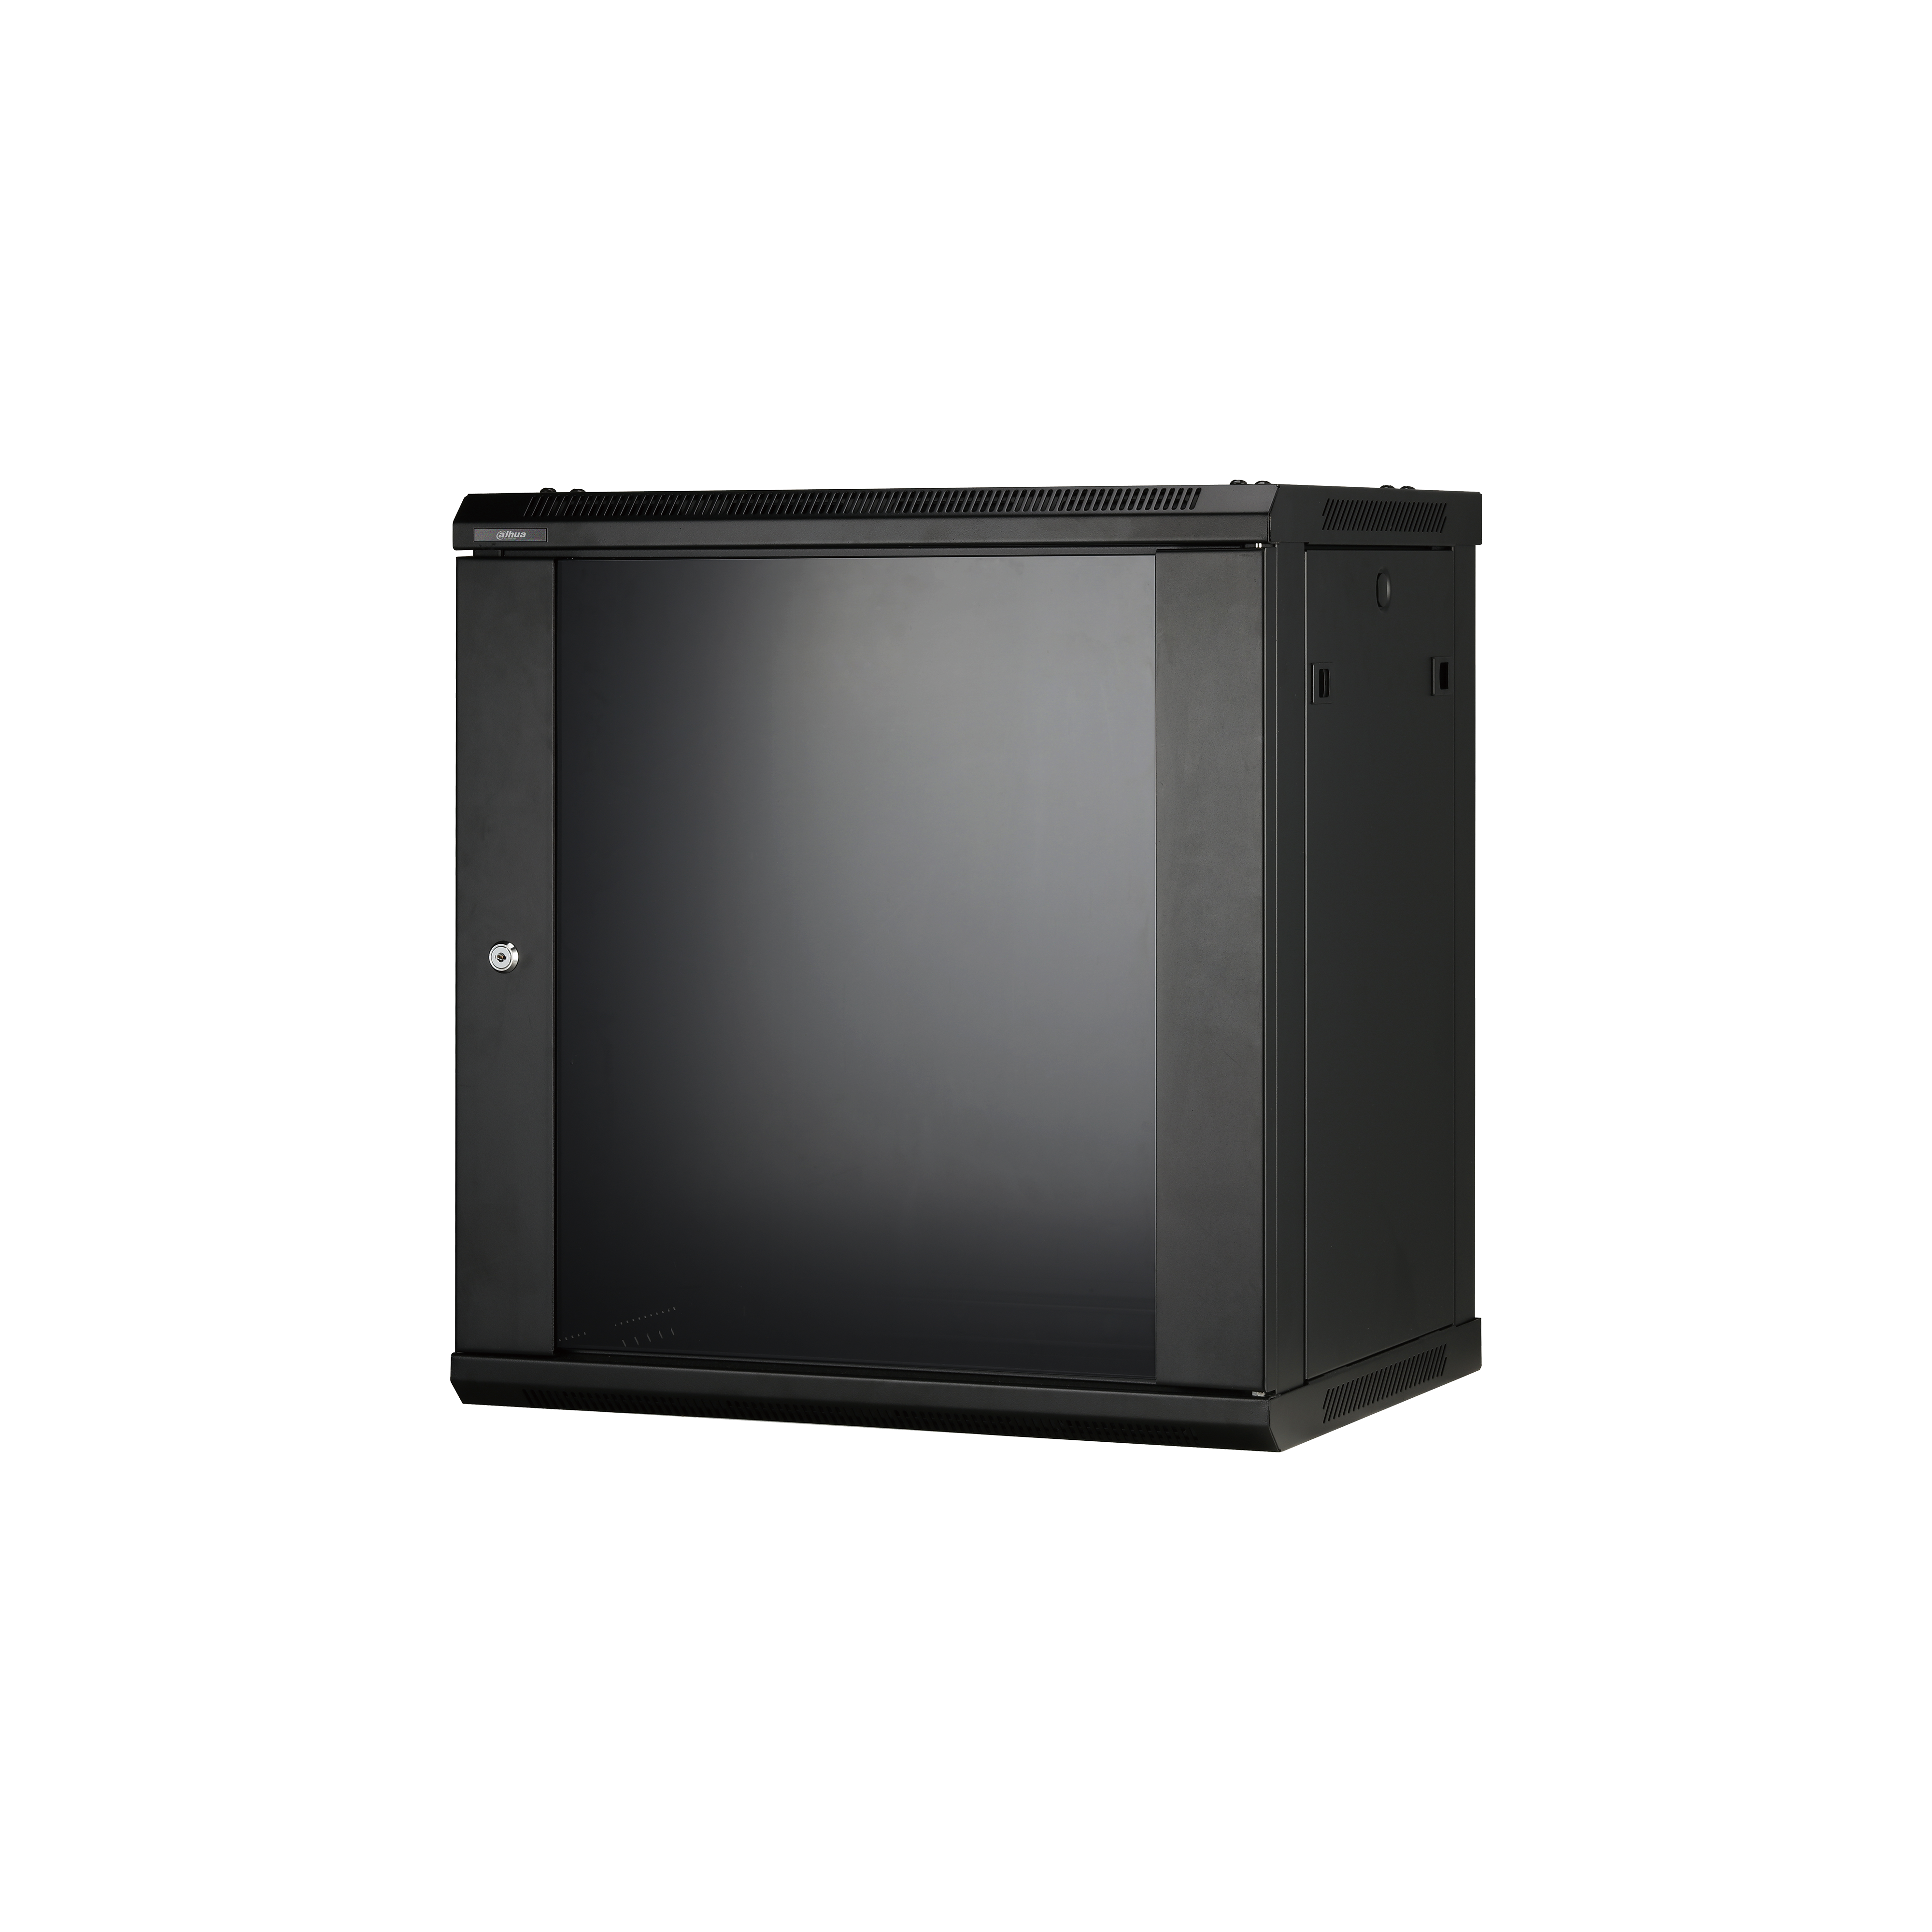 MA12URC | 19” 12U Wall Mount Cabinet for PoE Network Switches, NVRs, Servers, etc - Montavue